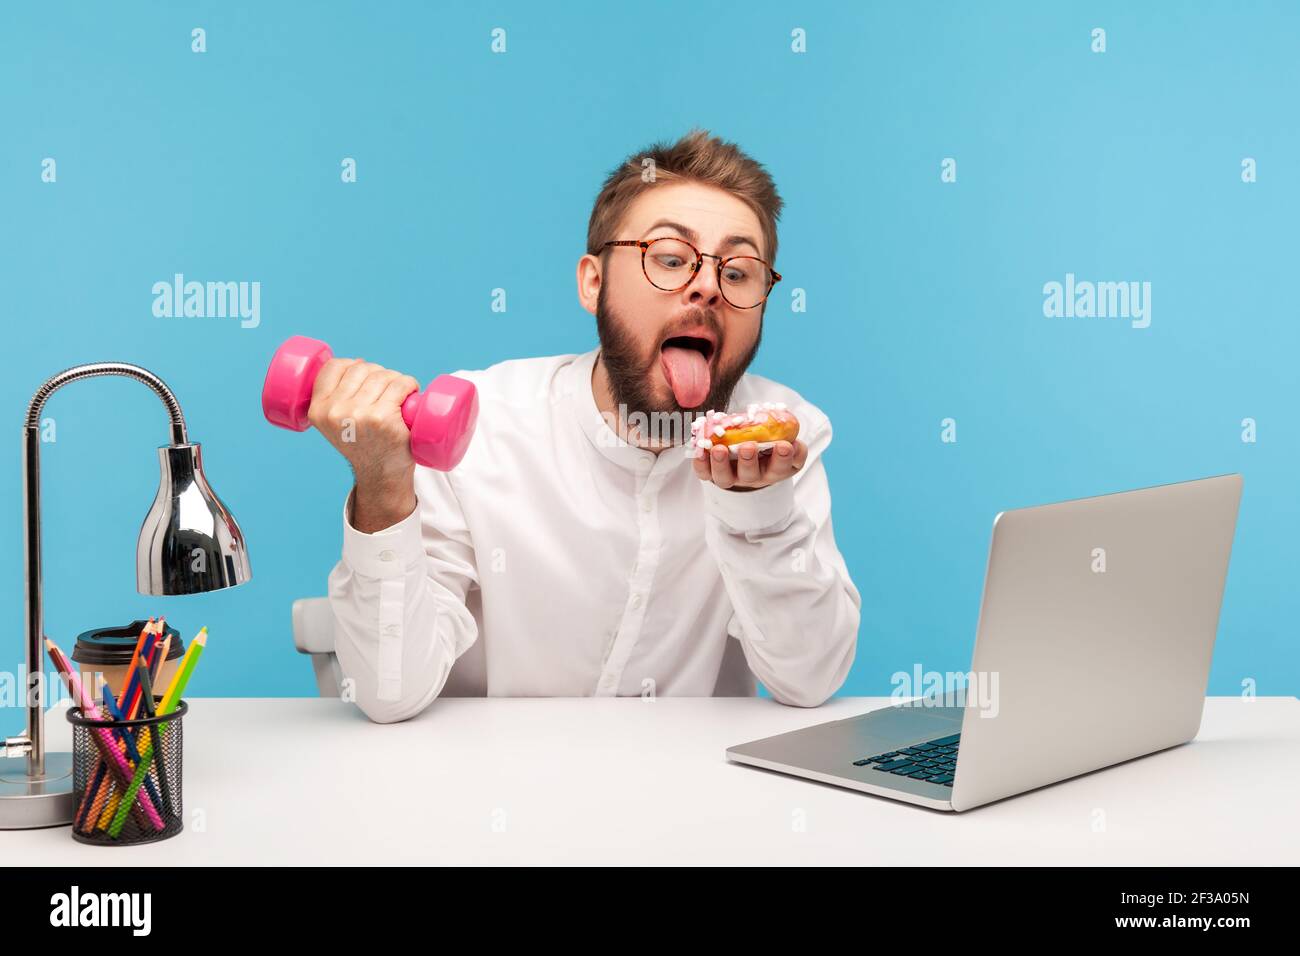 Funny bearded man office worker wanting to lick donut holding dumbbell in hand sitting at workplace, hard choice between sport and unhealthy eating, I Stock Photo